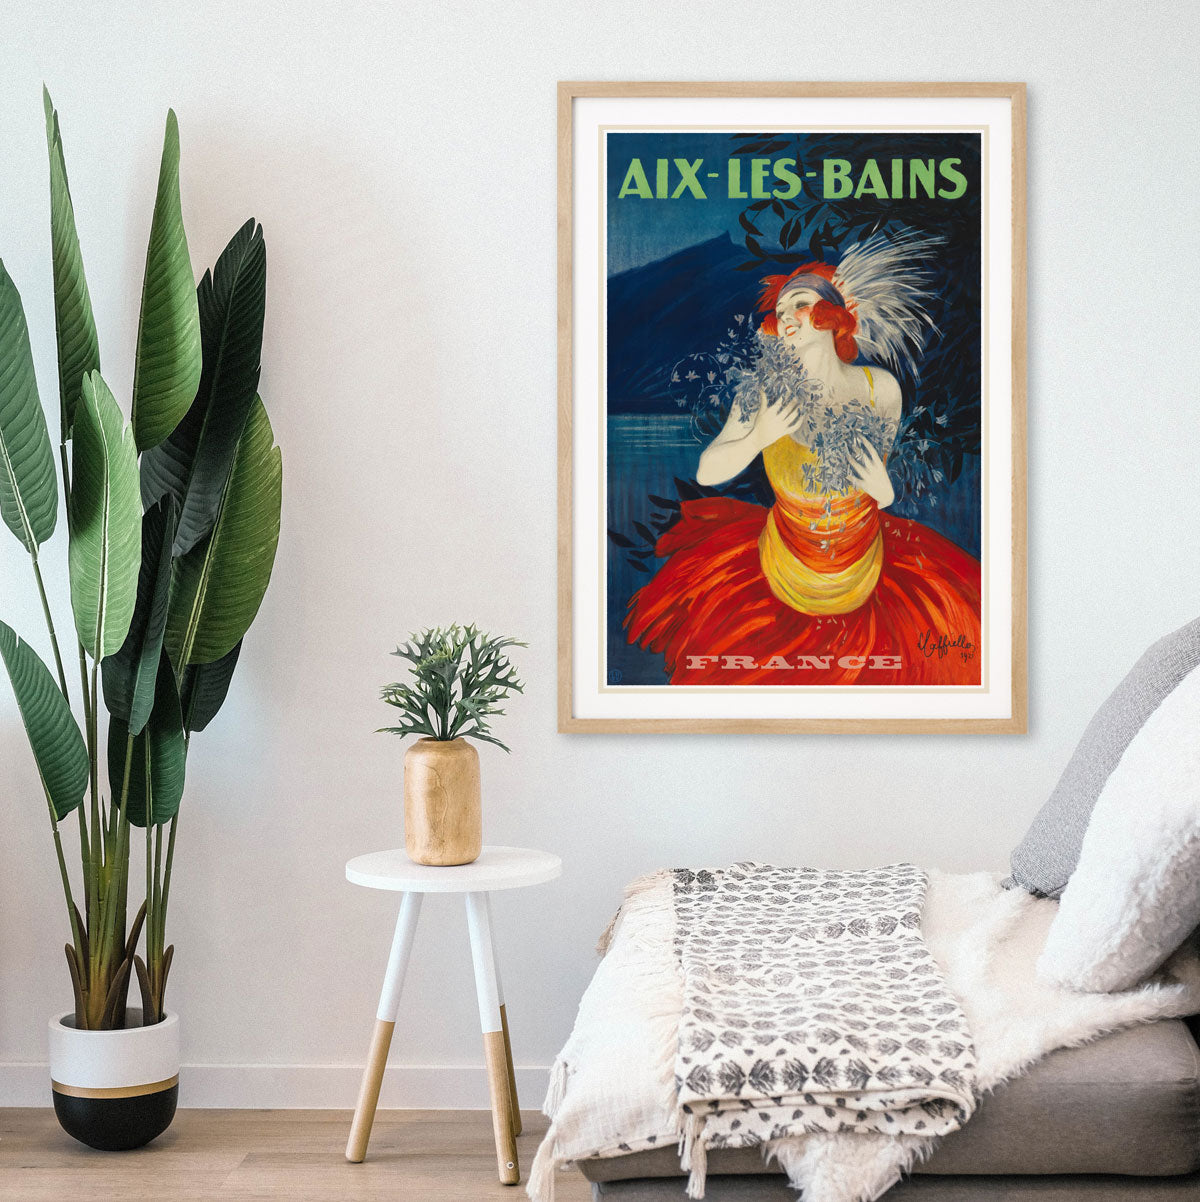 Aix les bains France vintage framed travel poster from Places We Luv